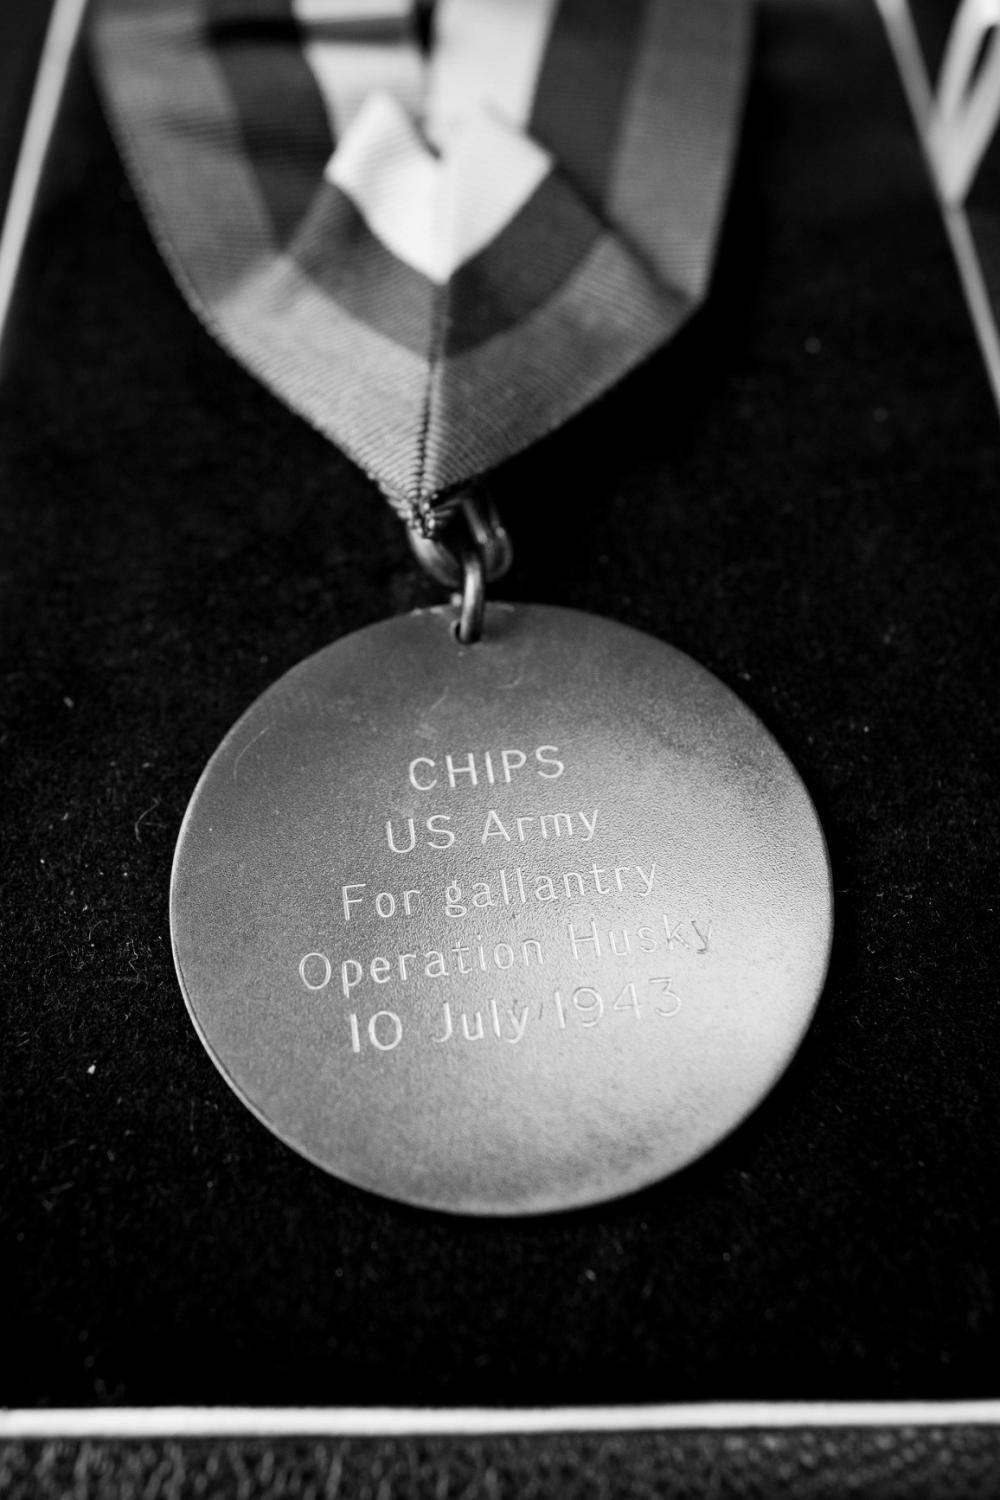 DVIDS - Images - Chips' People's Dispensary for Sick Animals Dickin Medal  [Image 2 of 3]